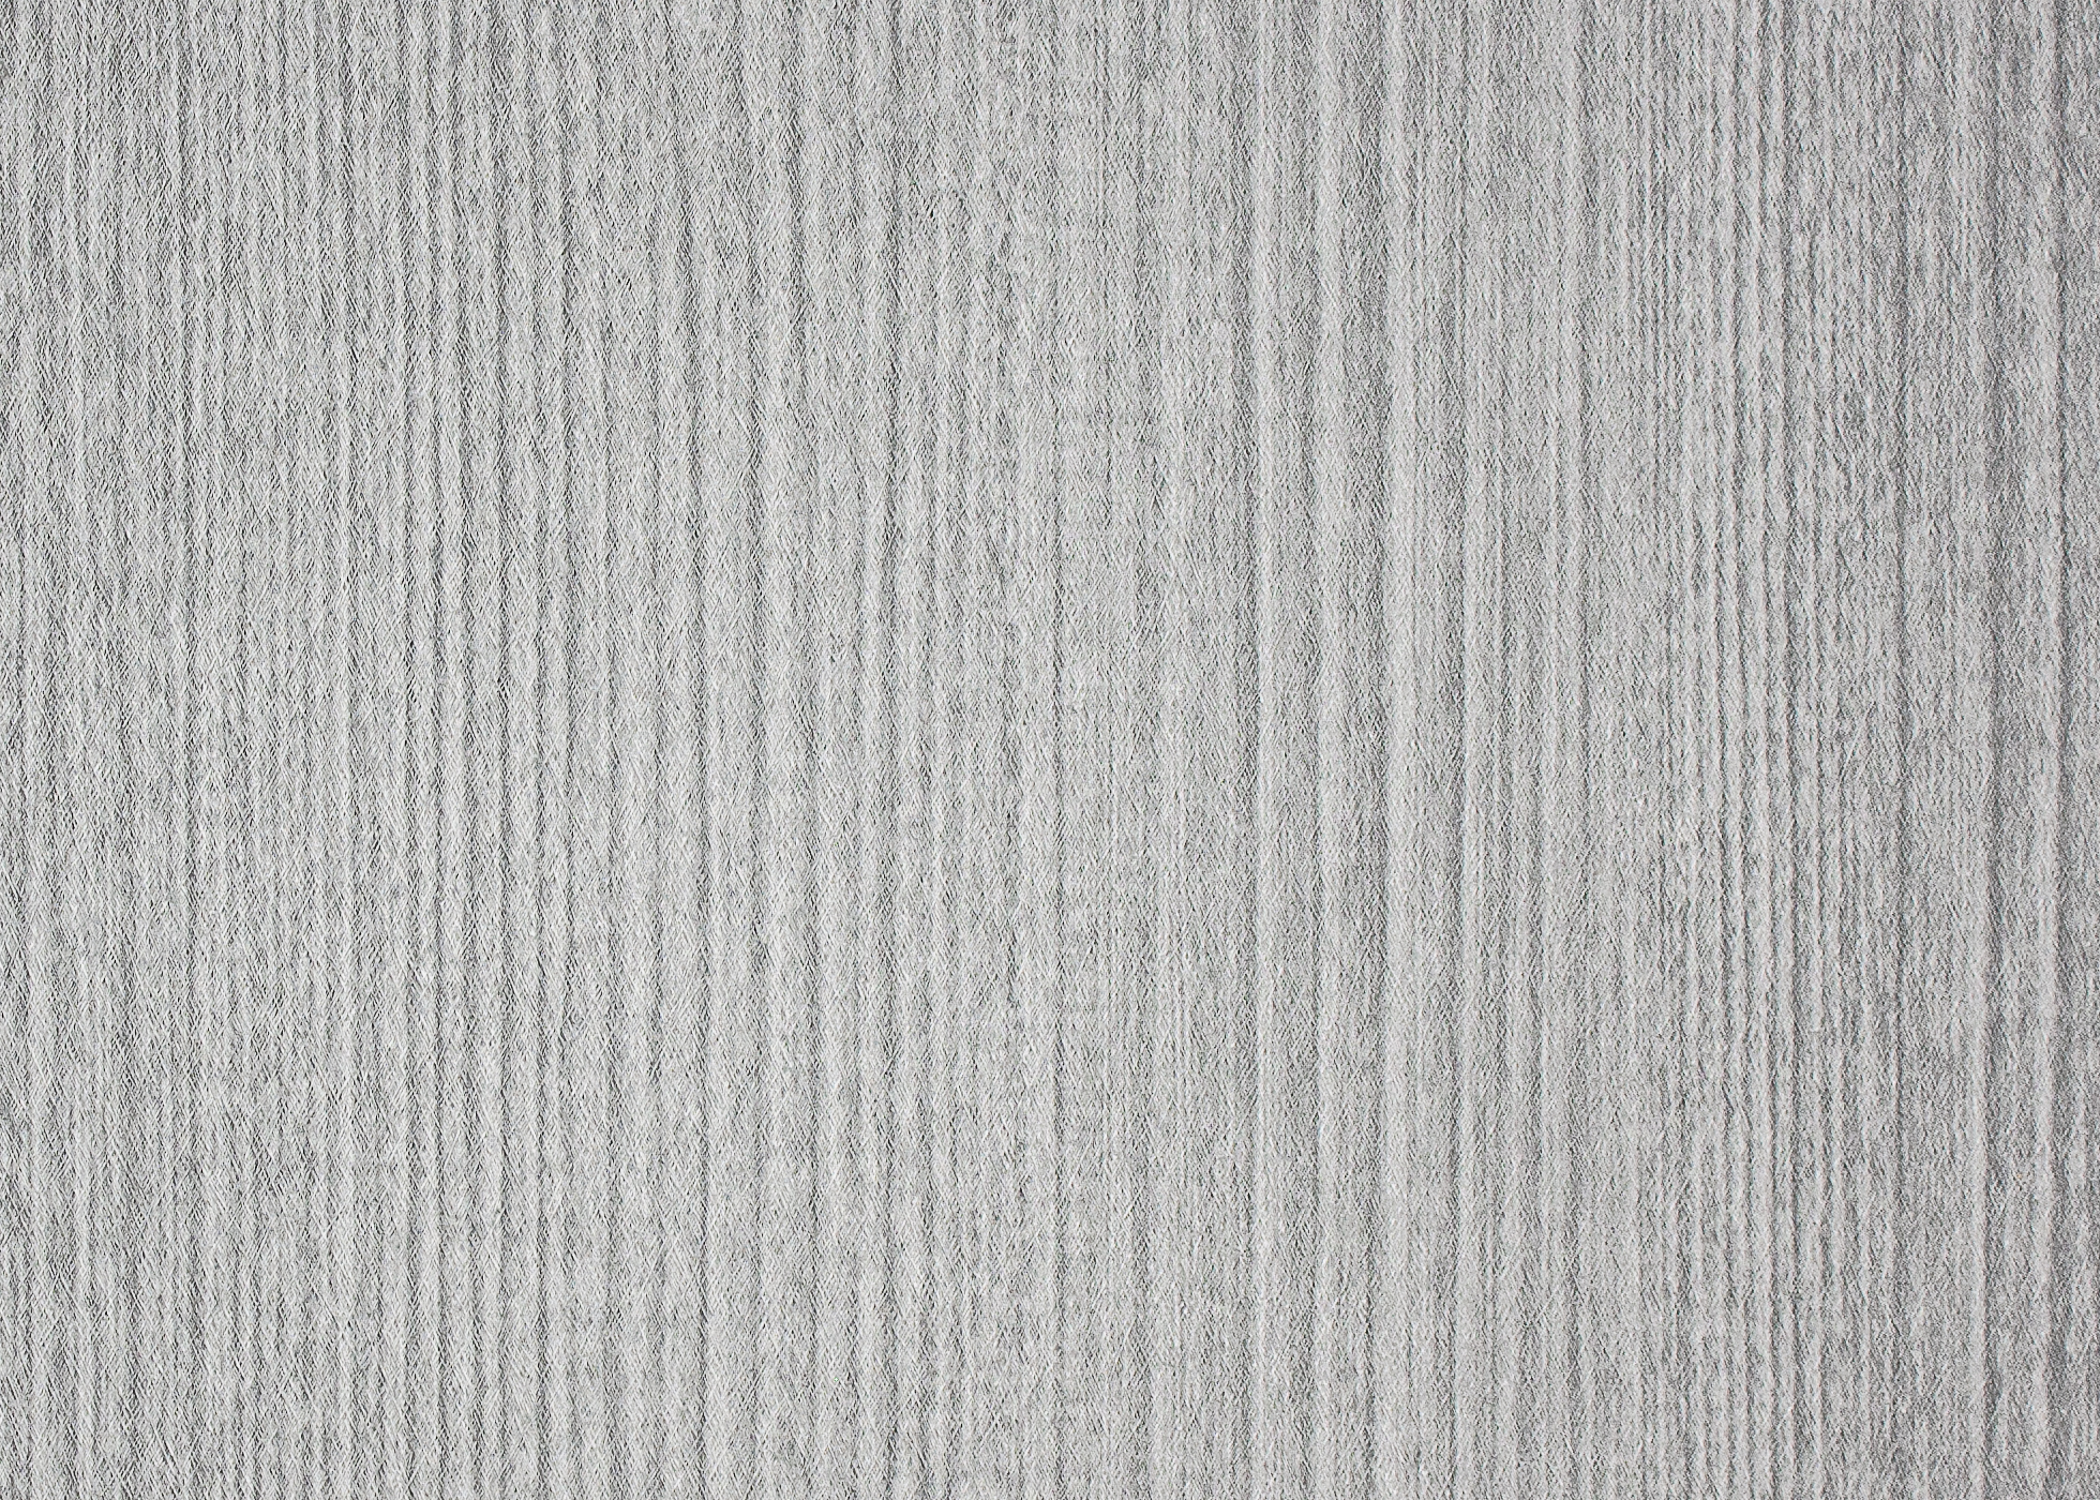 Roysons Wallcovering Lacewood Glade 8433